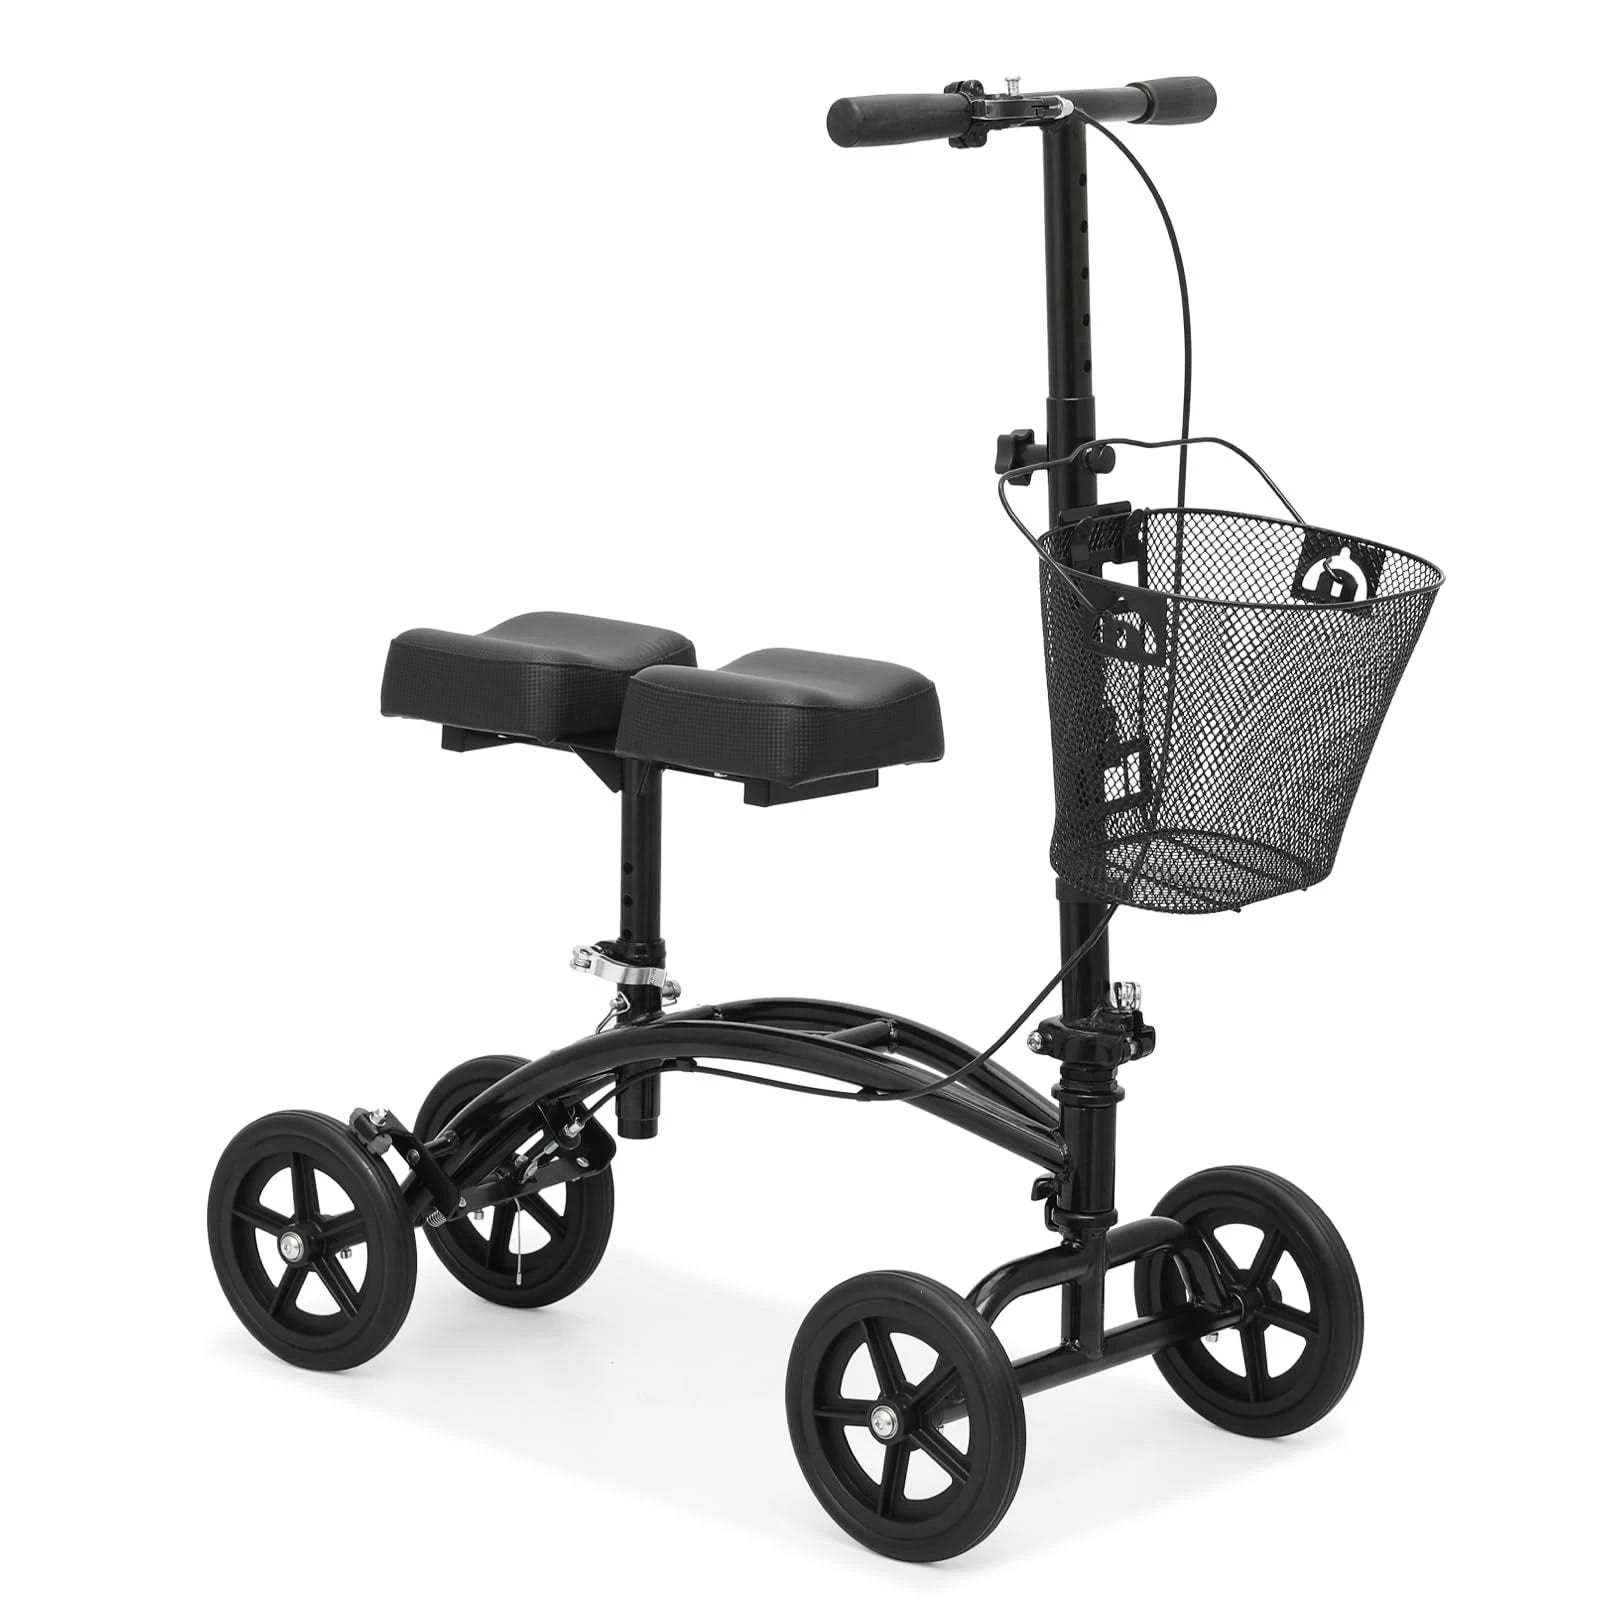 Heavy Duty All-Terrain Foldable Knee Scooter with Basket and Adjustable Height | Image